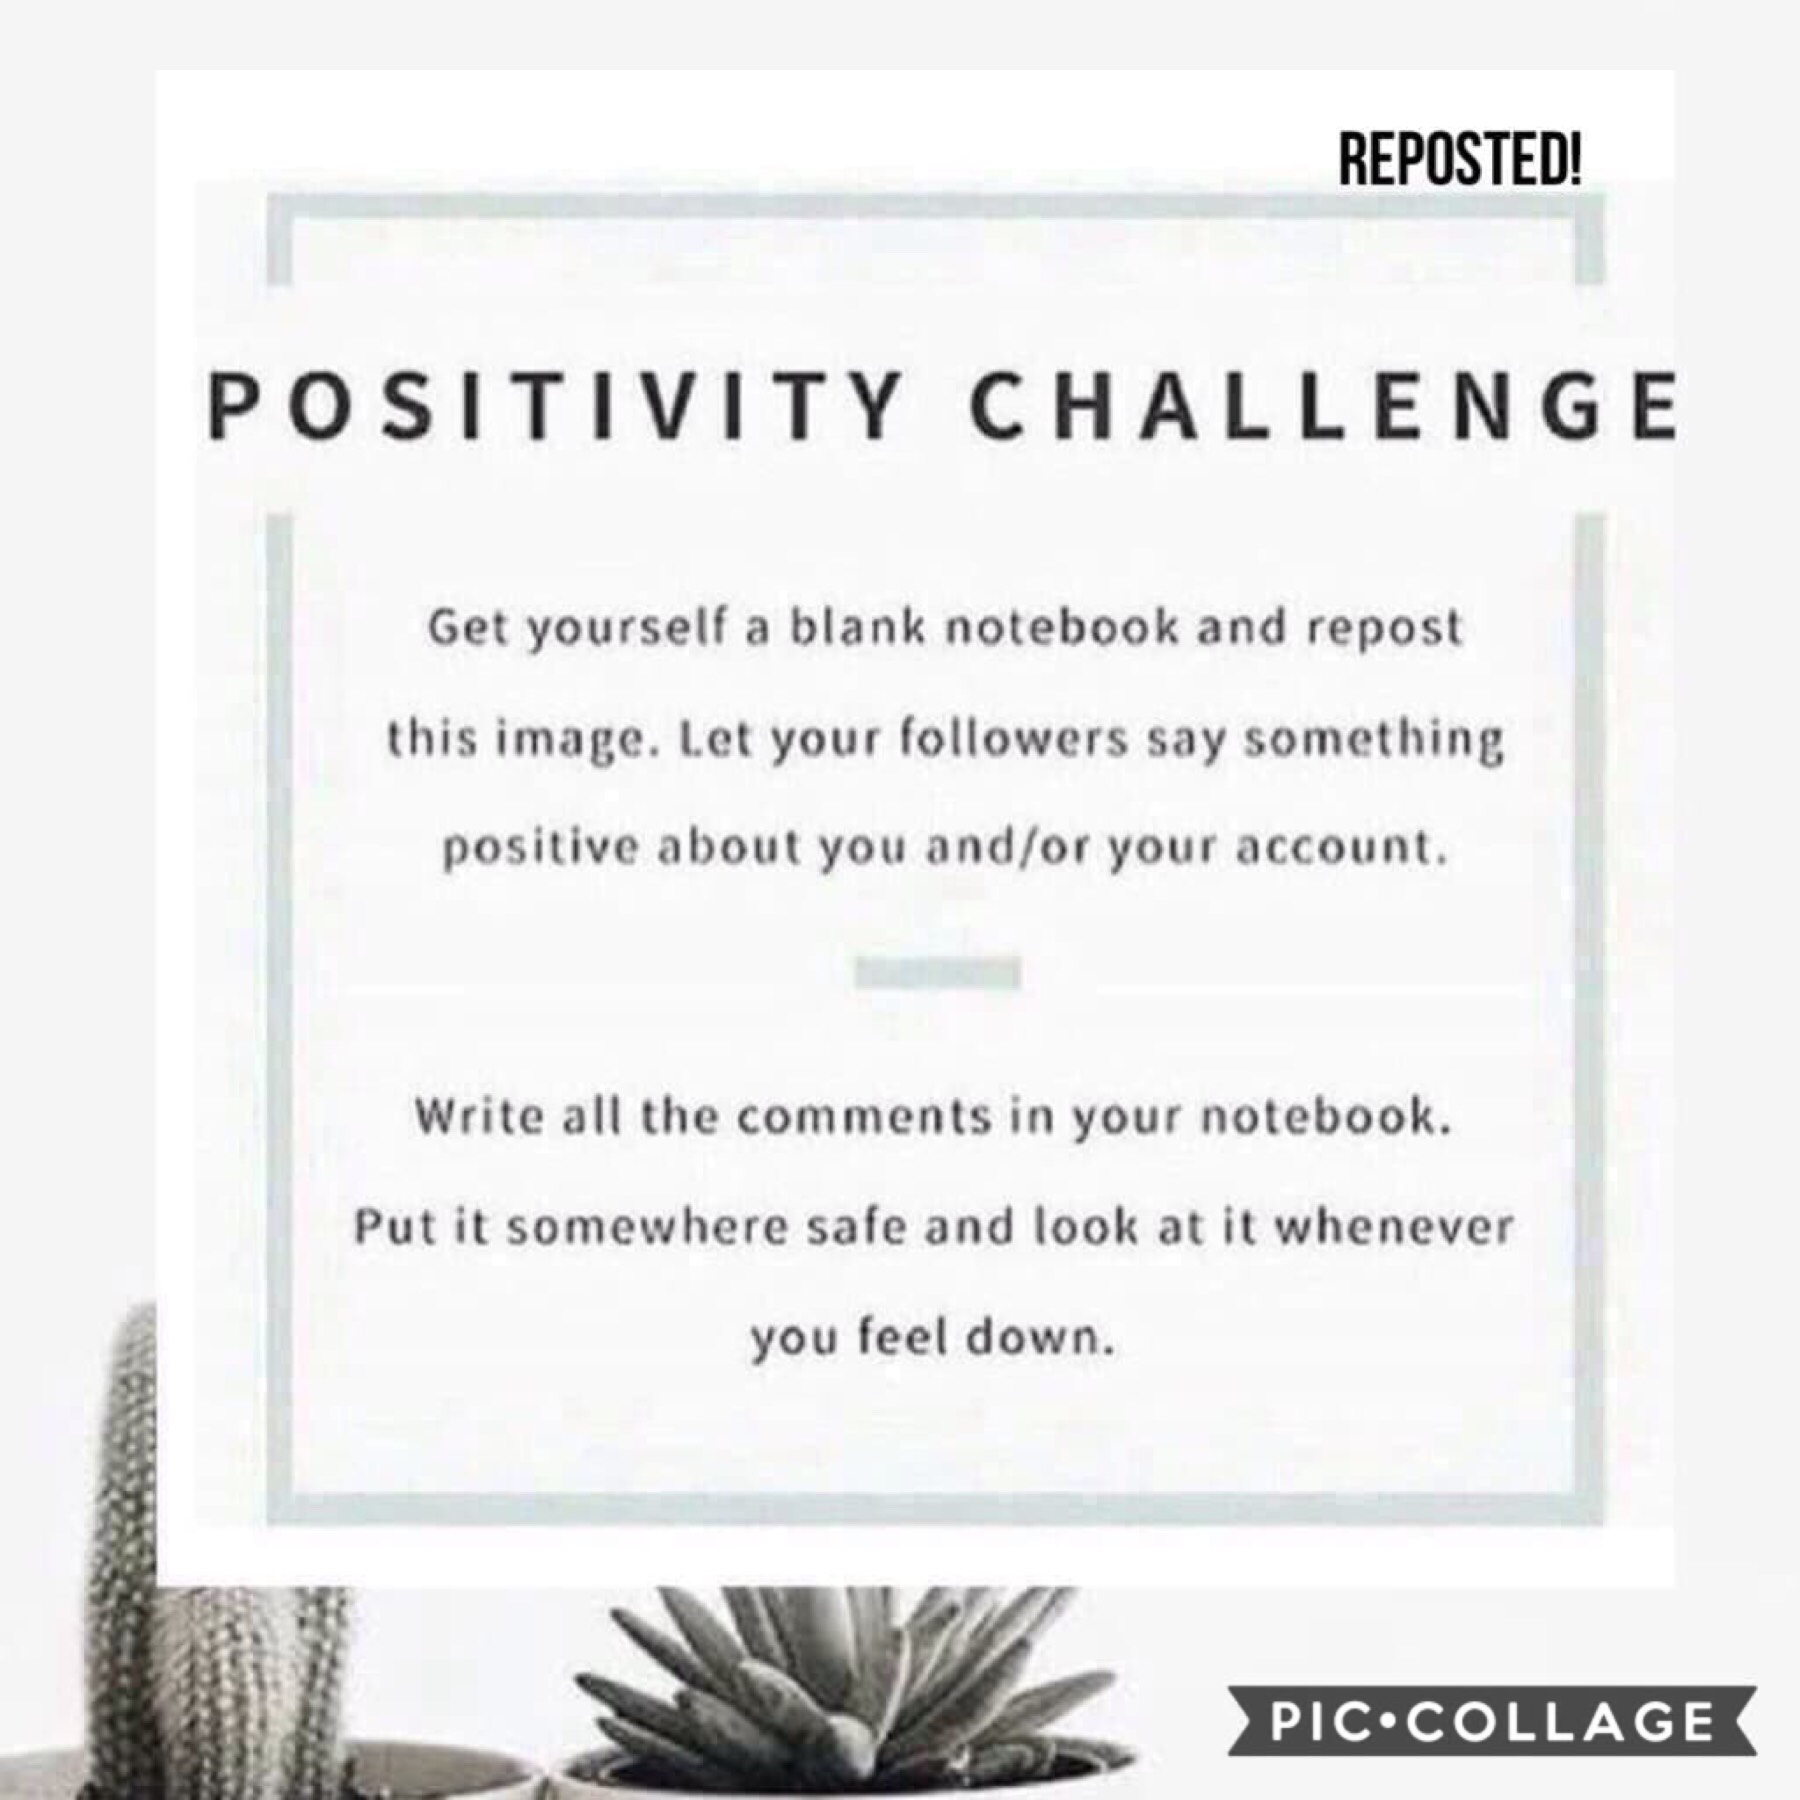 Reposted - Positivity Challenge